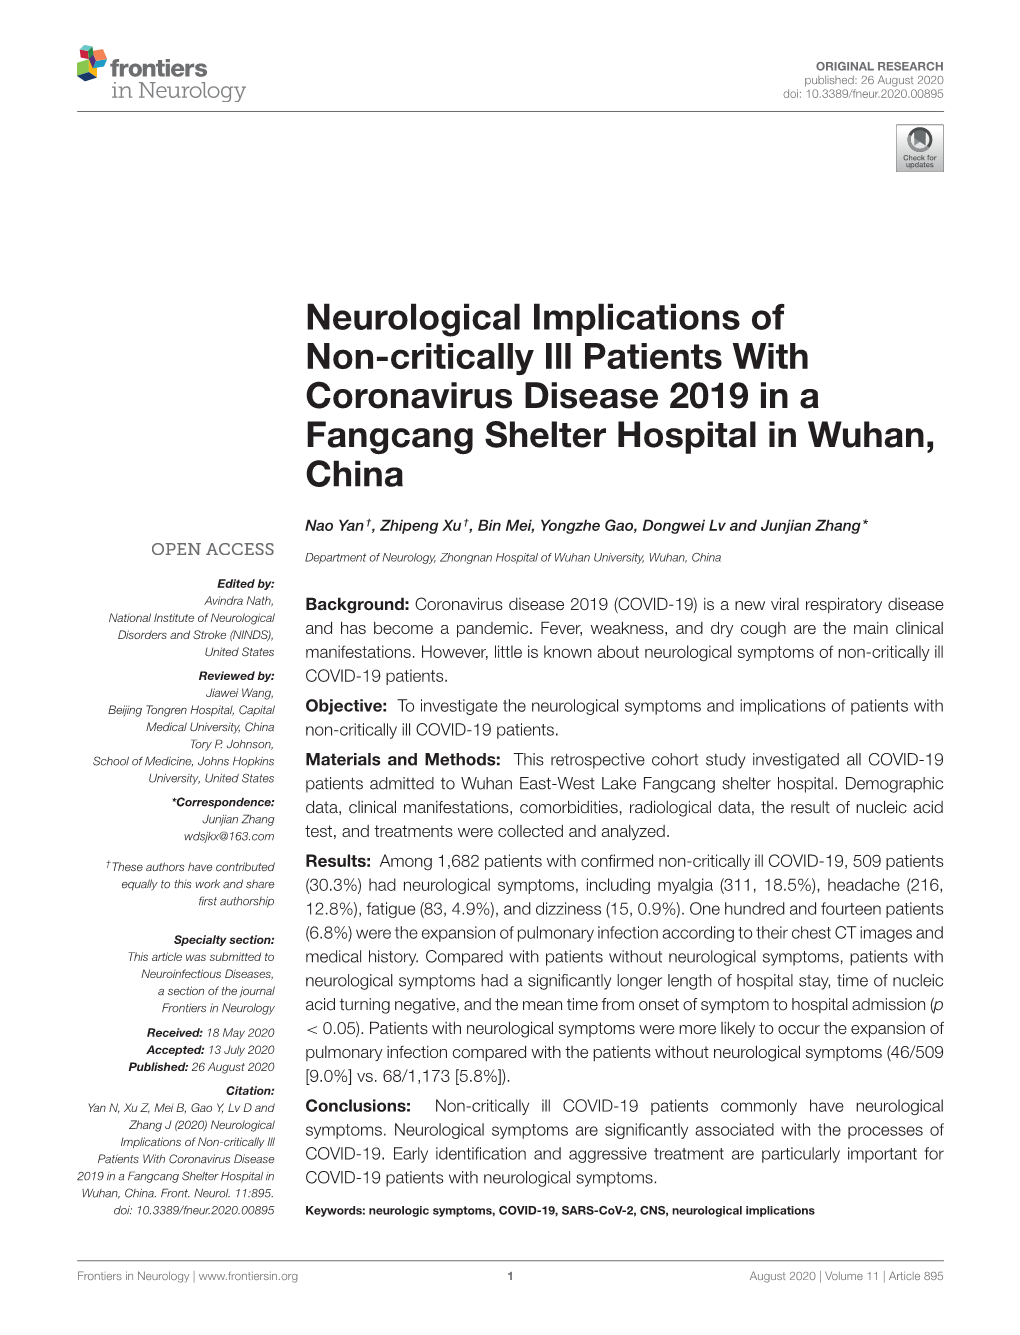 Neurological Implications of Non-Critically Ill Patients with Coronavirus Disease 2019 in a Fangcang Shelter Hospital in Wuhan, China